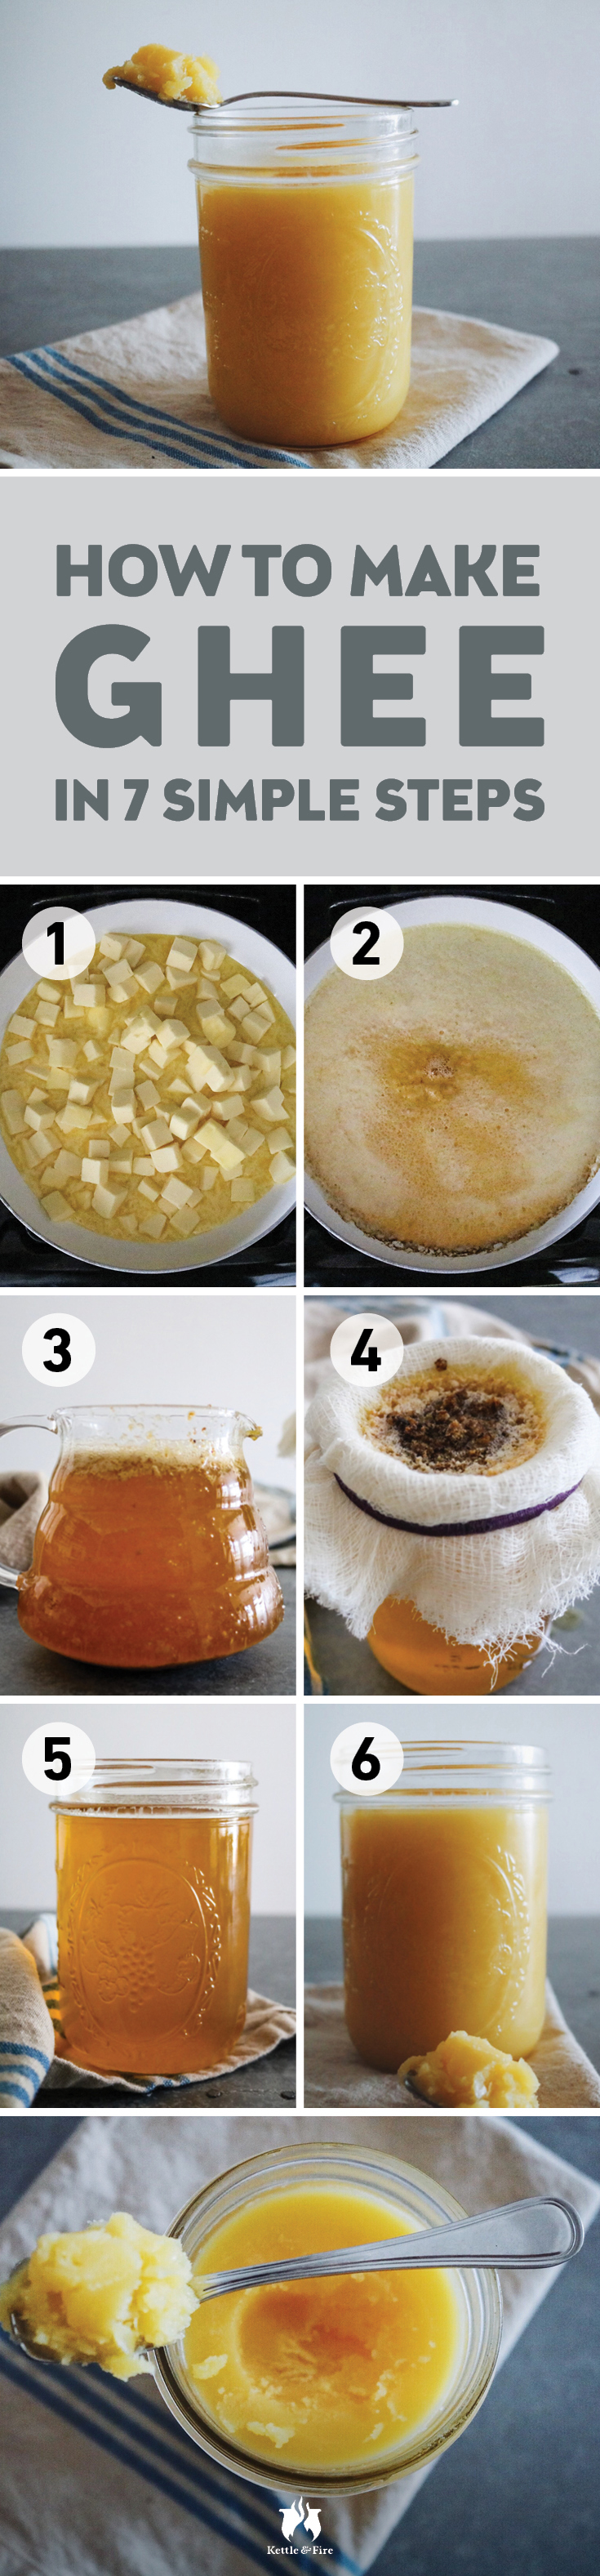 Ever wondered how to make ghee at home? We've got you covered with this simple step-by-step photo guide. 